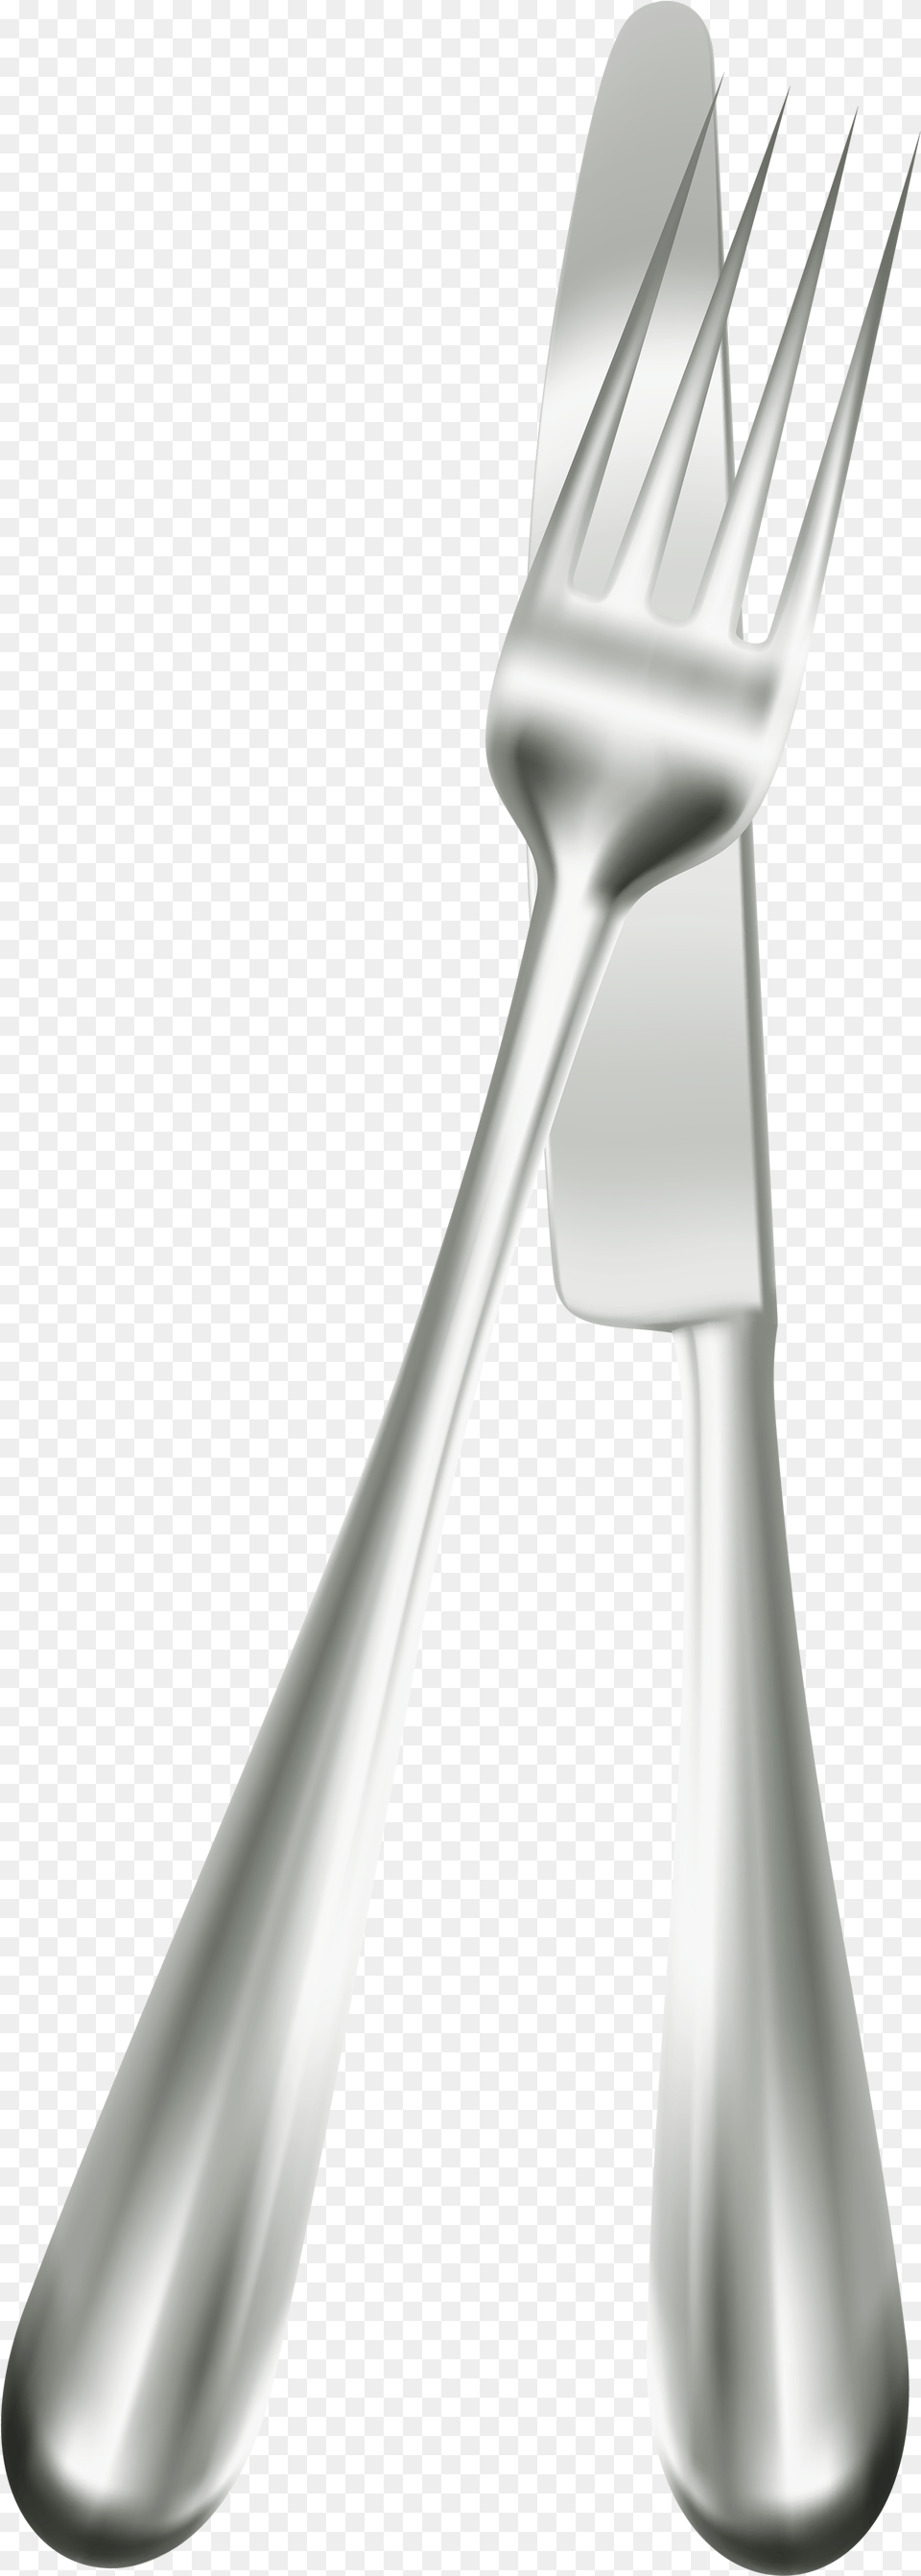 Table Fork And Knife Clipart Fork And Knife, Cutlery Free Transparent Png